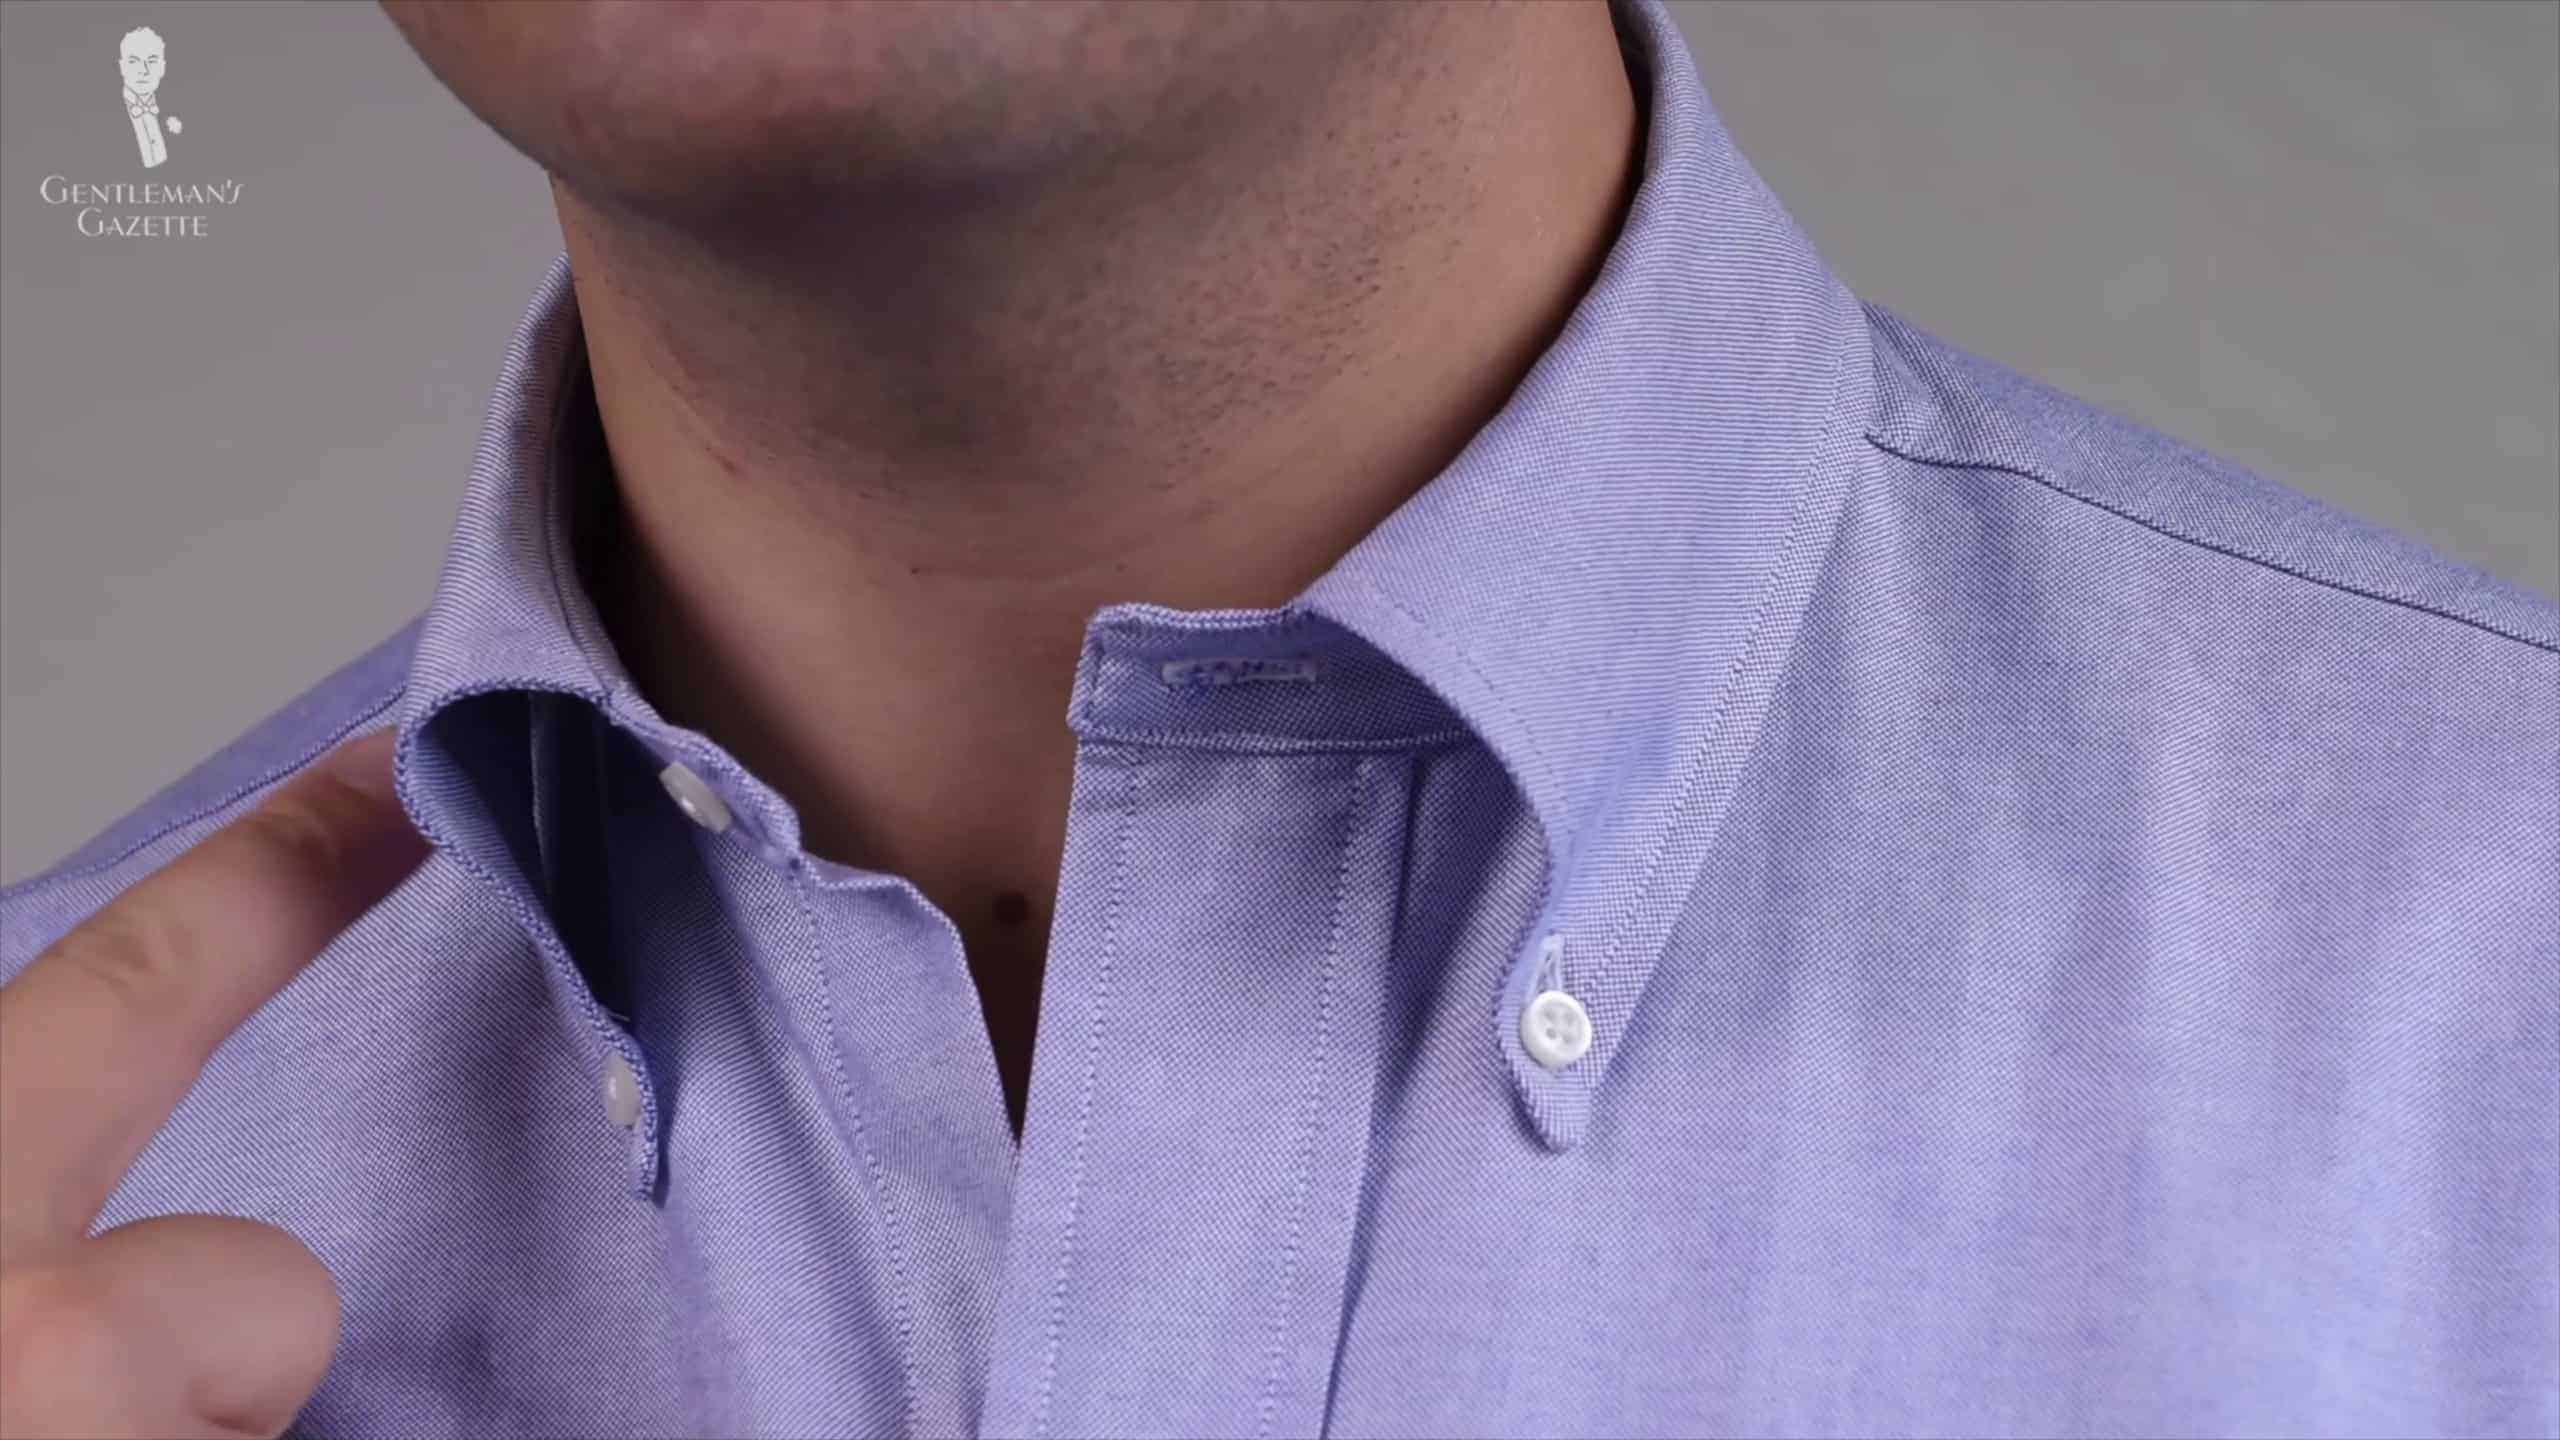 An unlined collar isn't advisable for a more formal shirt, but would work with a button-down collar shirt.